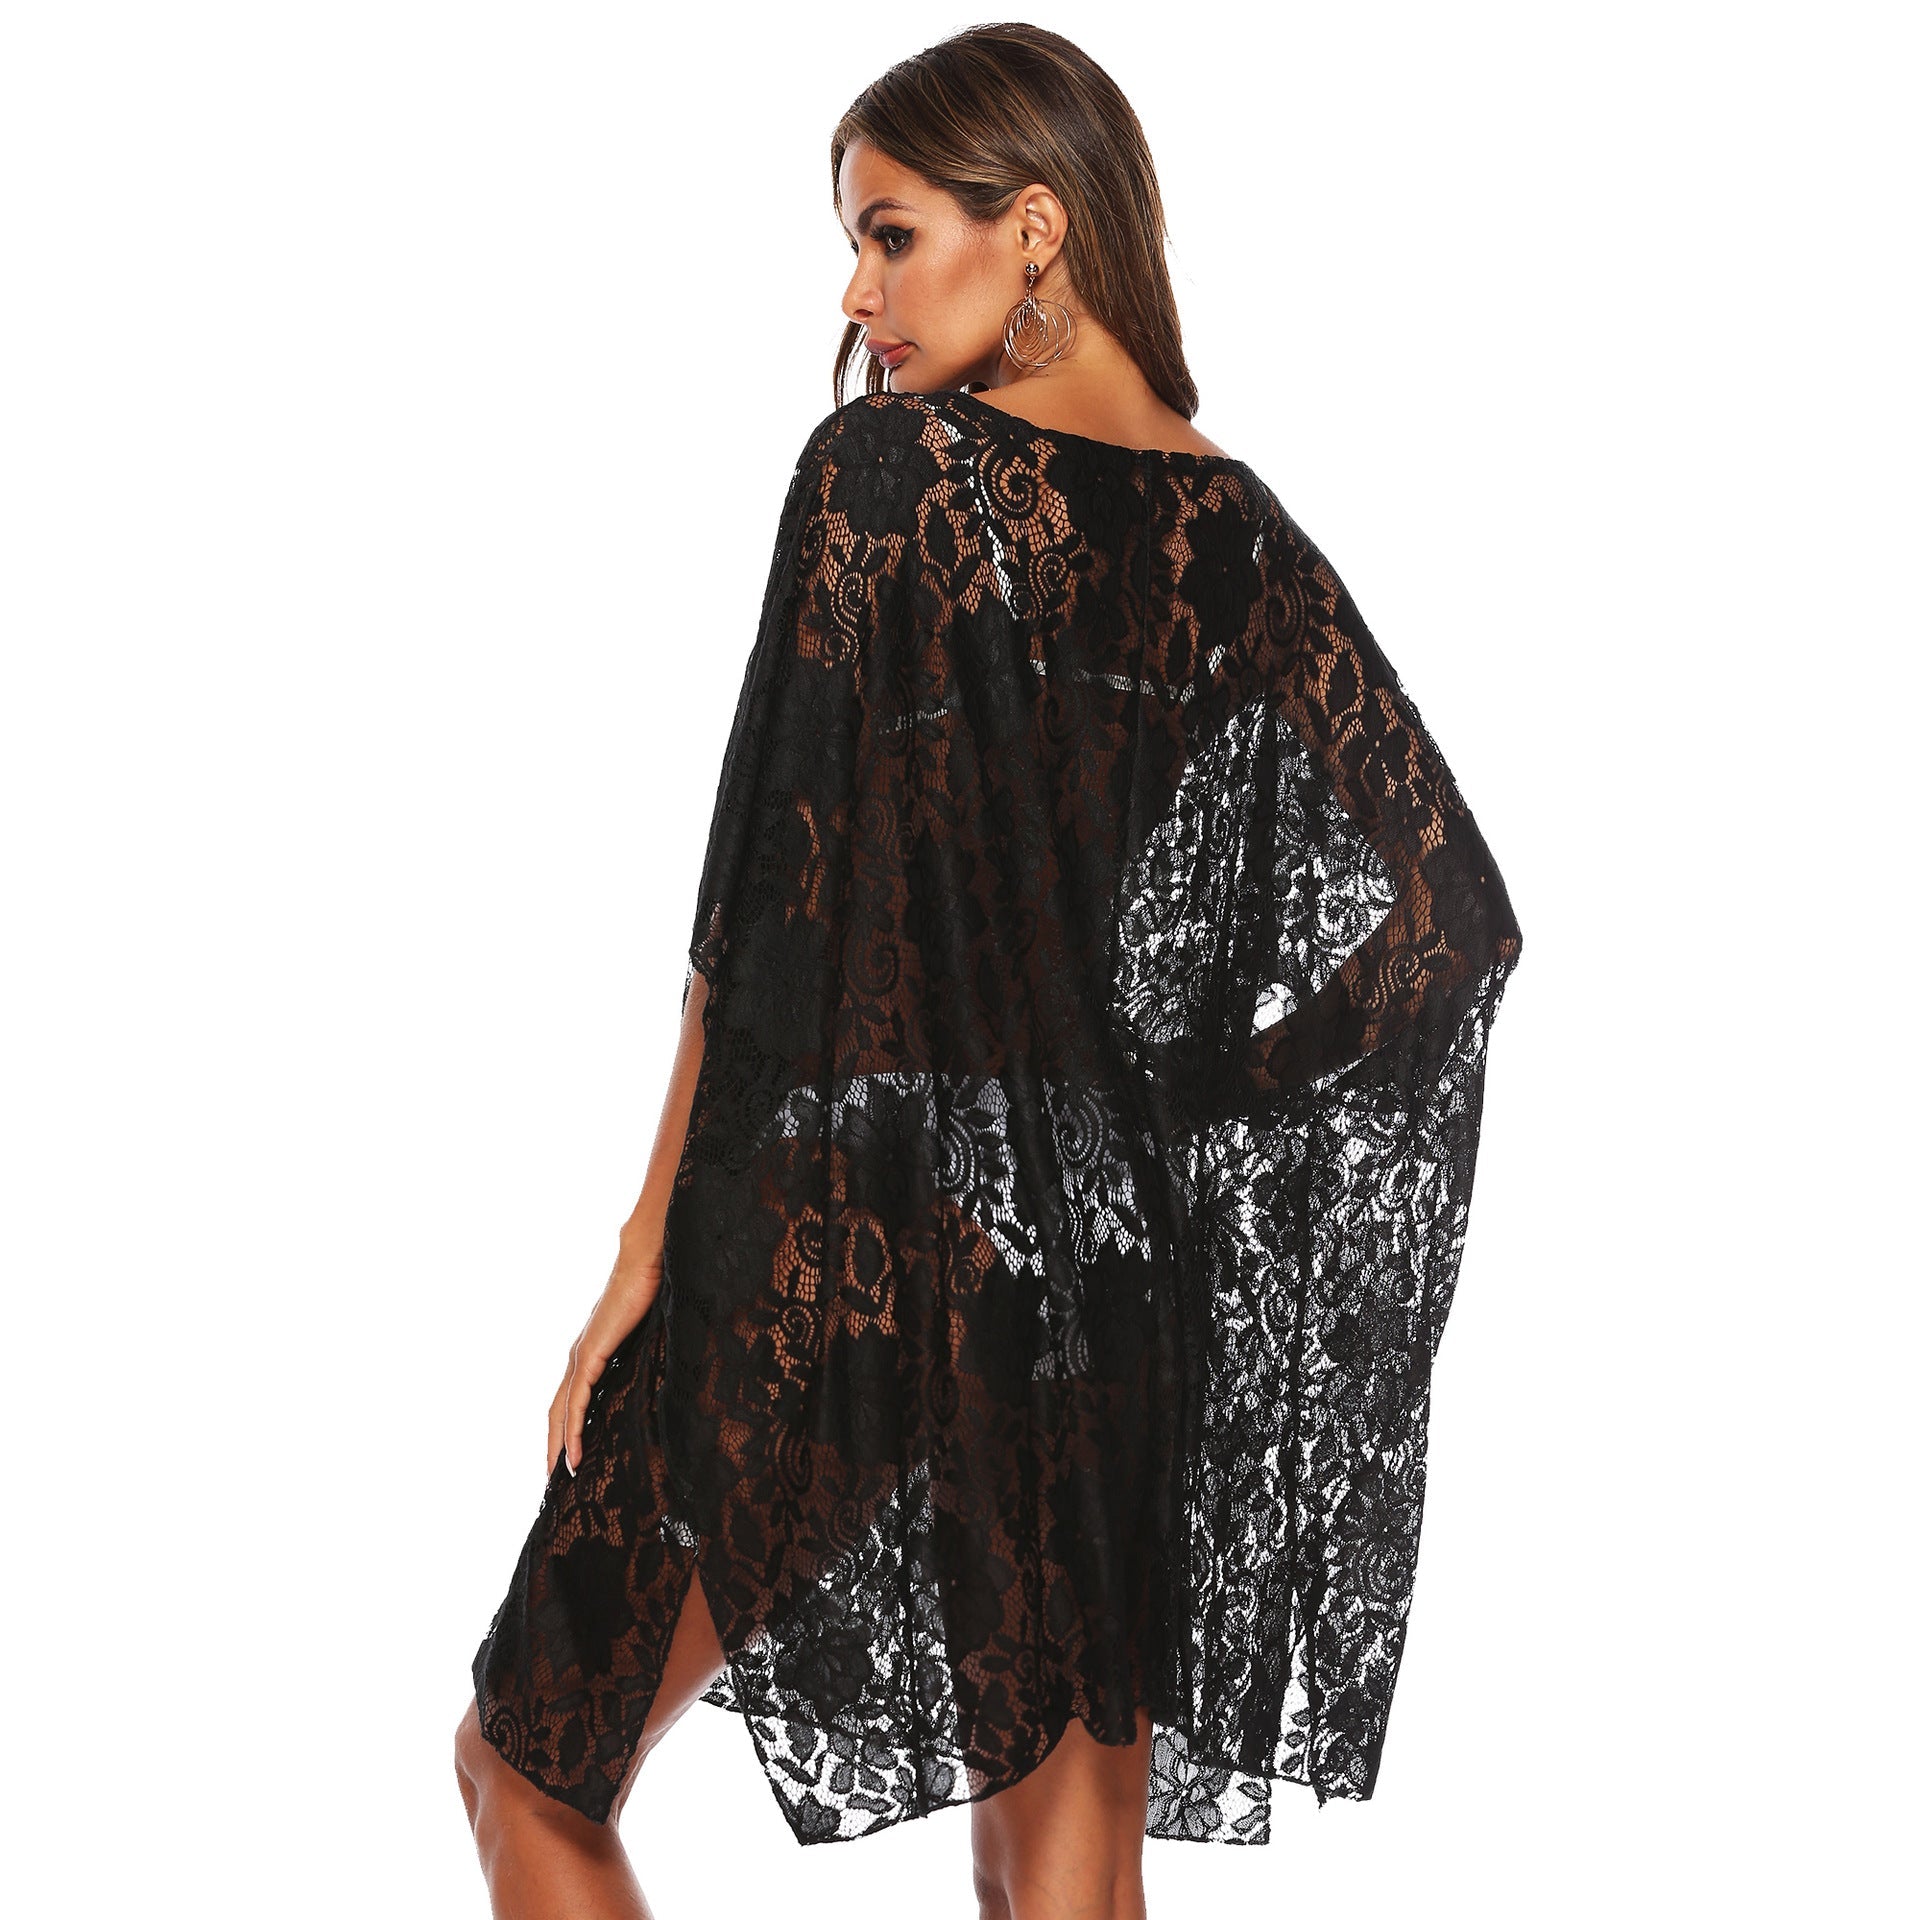 Black Lace See Through Summer Beach Cover Ups-Swimwear-Black-One Size-Free Shipping at meselling99